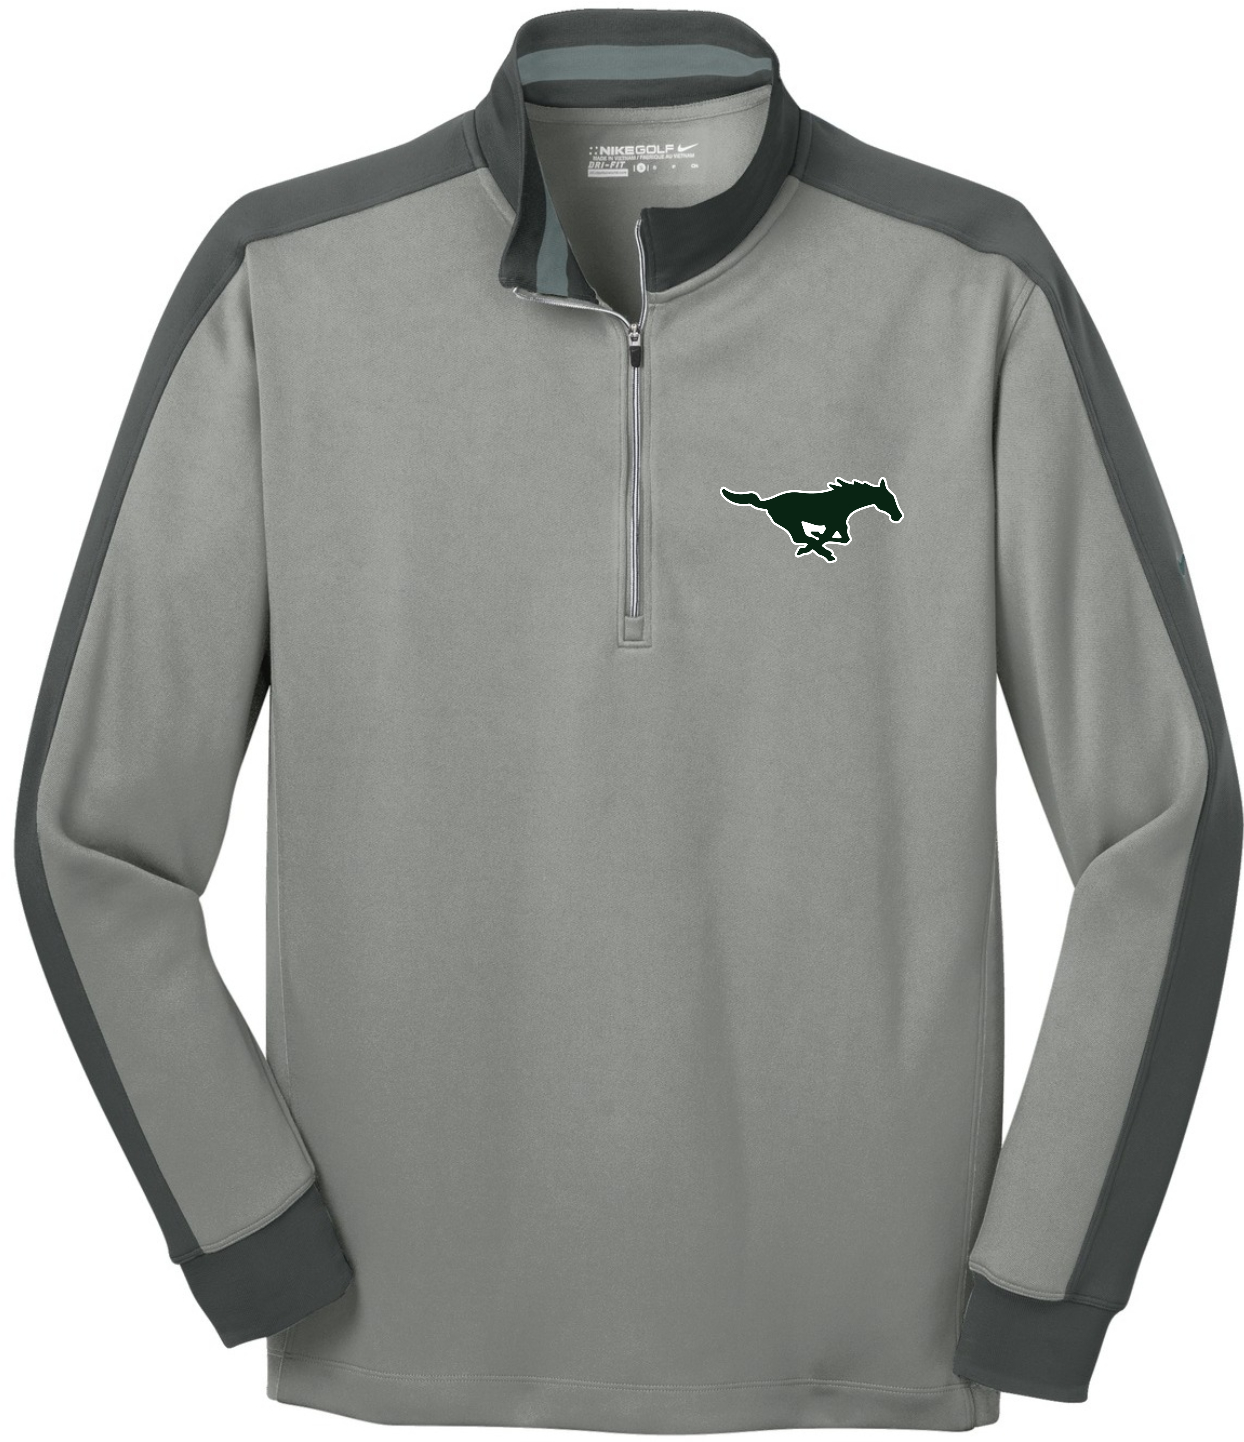 West Perry Nike Tech Half-Zip Cover Up